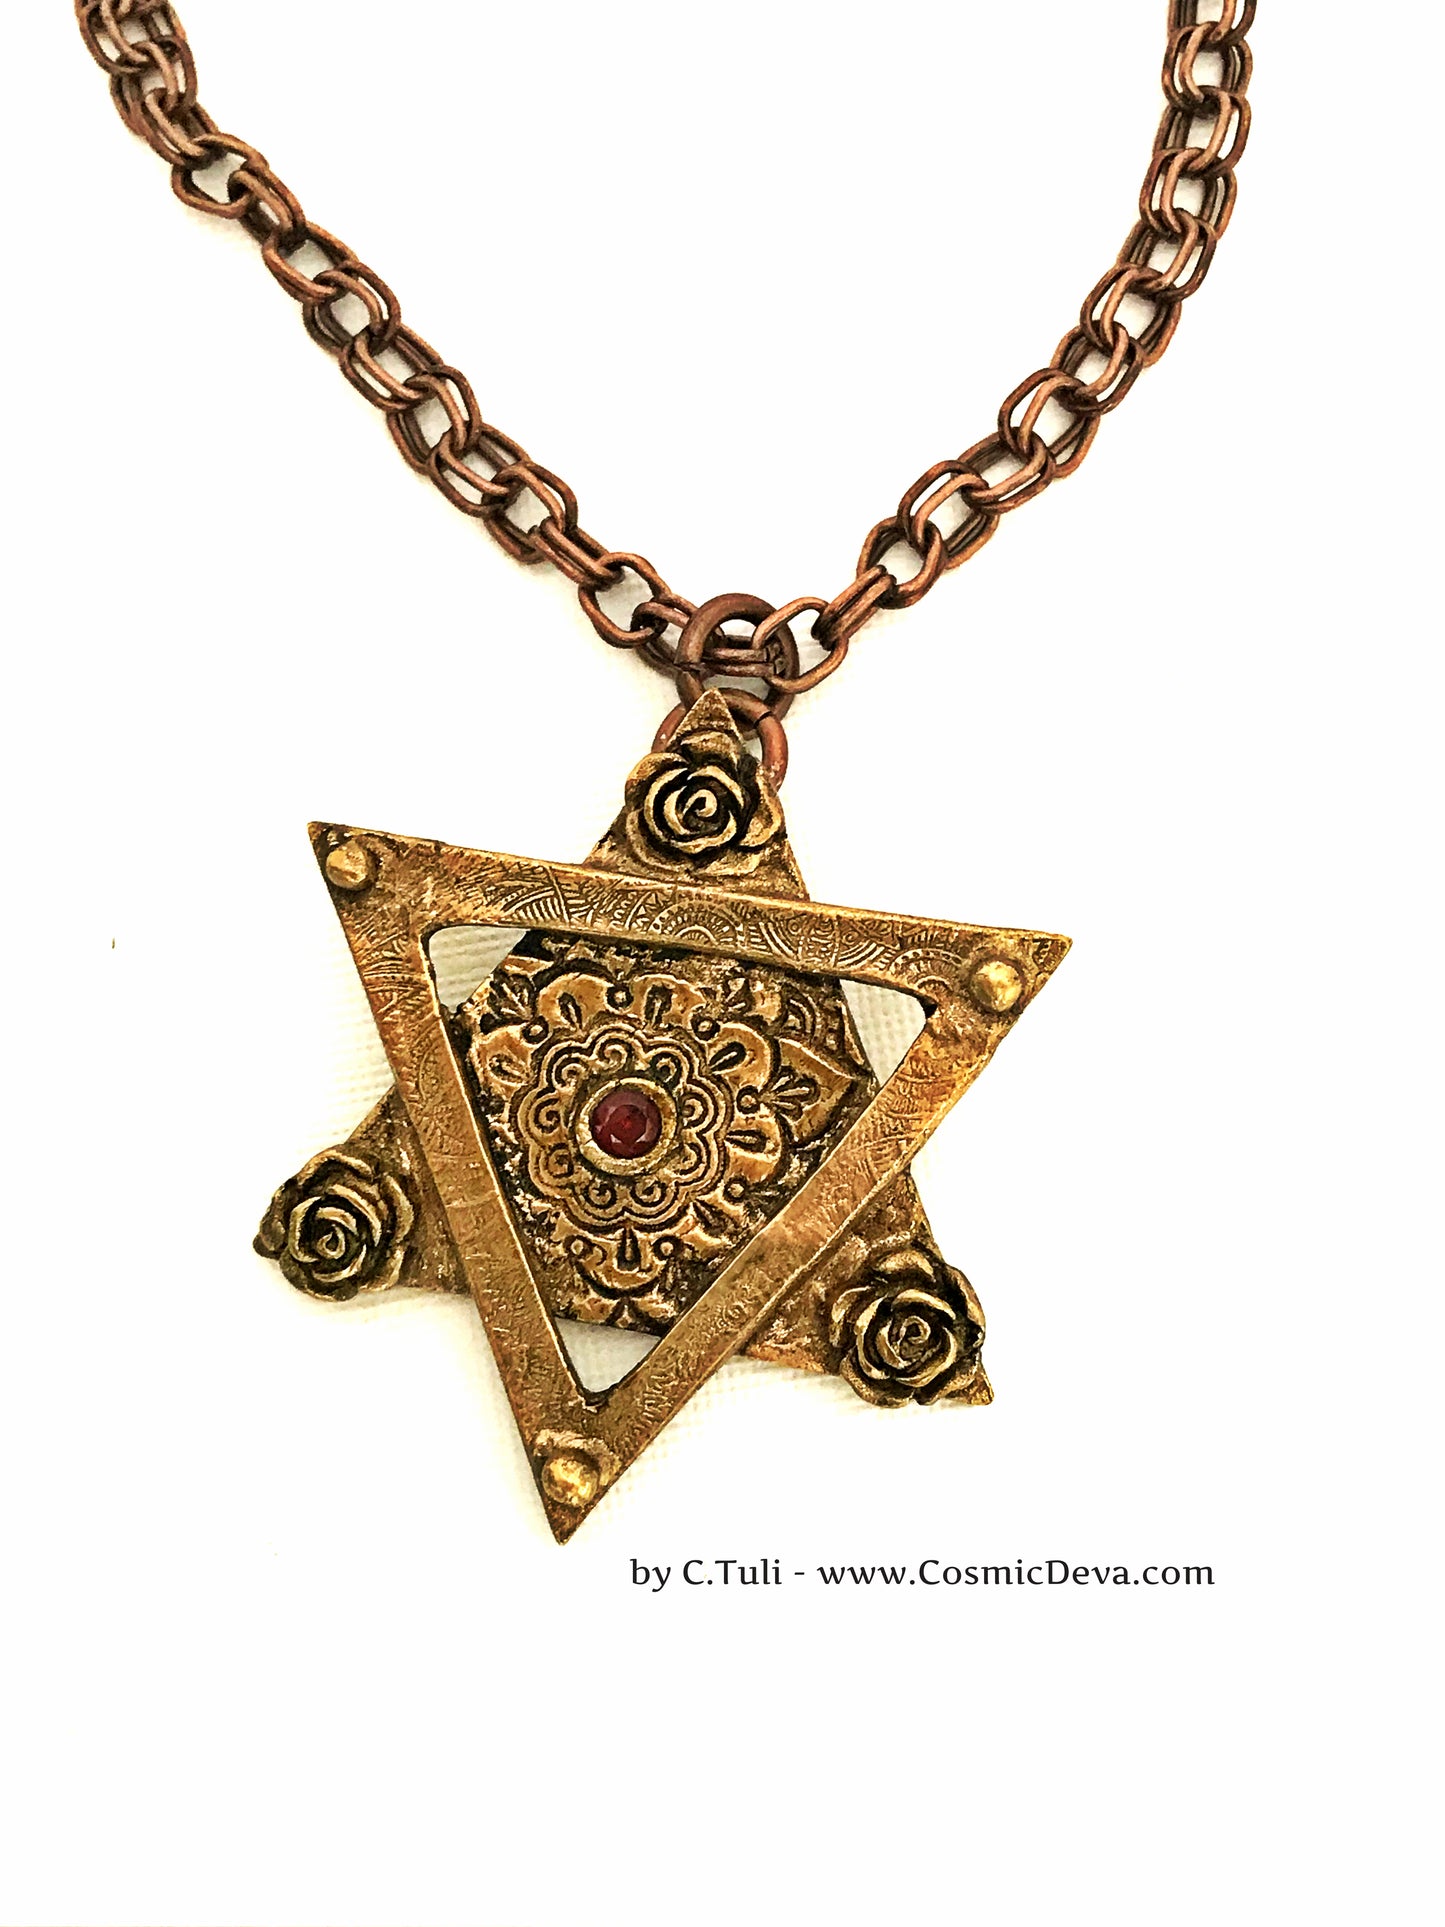 Be the star of any Bat Mitzvah with this exquisite Star of David Necklace! Crafted with an original hand-sculpted bronze design and featuring a red lab-grown garnet hessonite stone, this unique Magen David pendant will add a touch of elegance and tradition to your special day. CosmicDeva